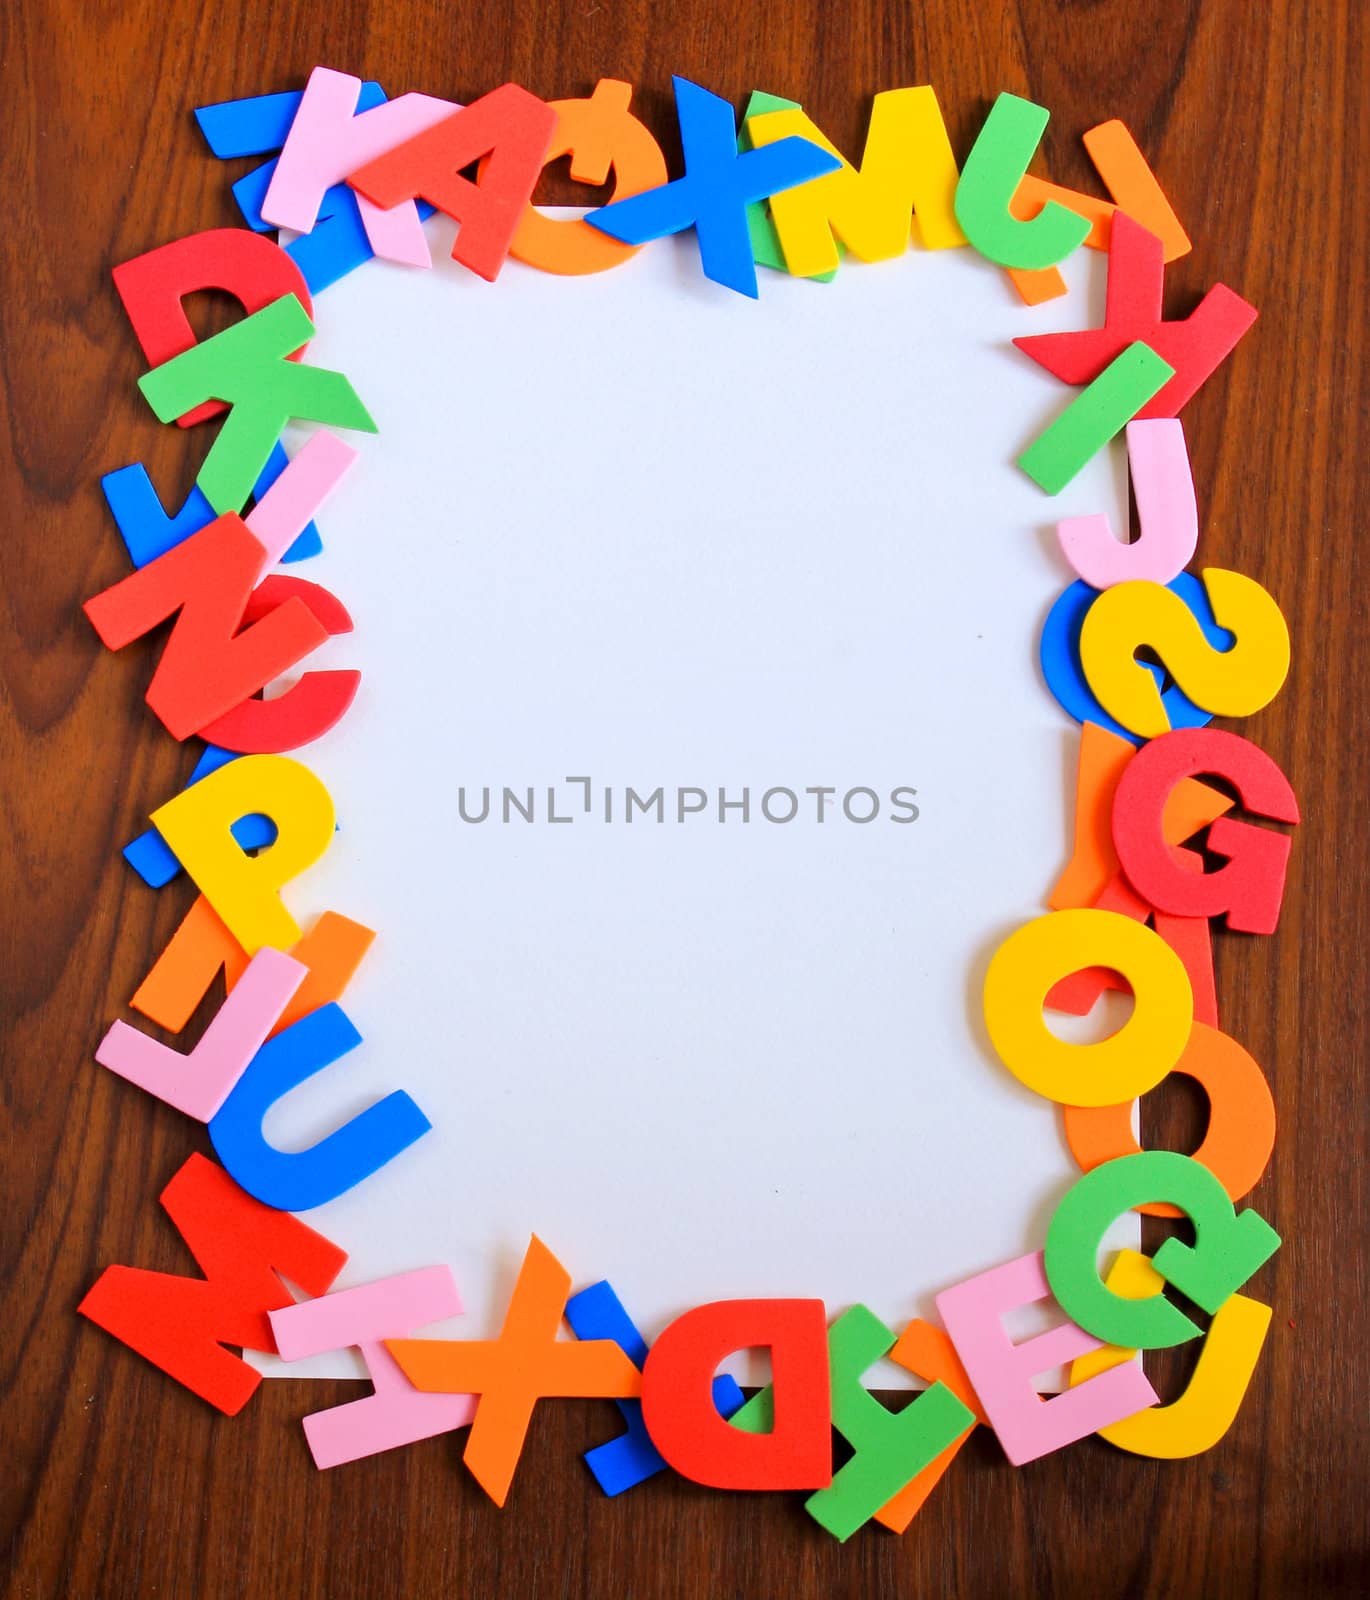 Colorful alphabet as frame with white paper on wooden background by nuchylee